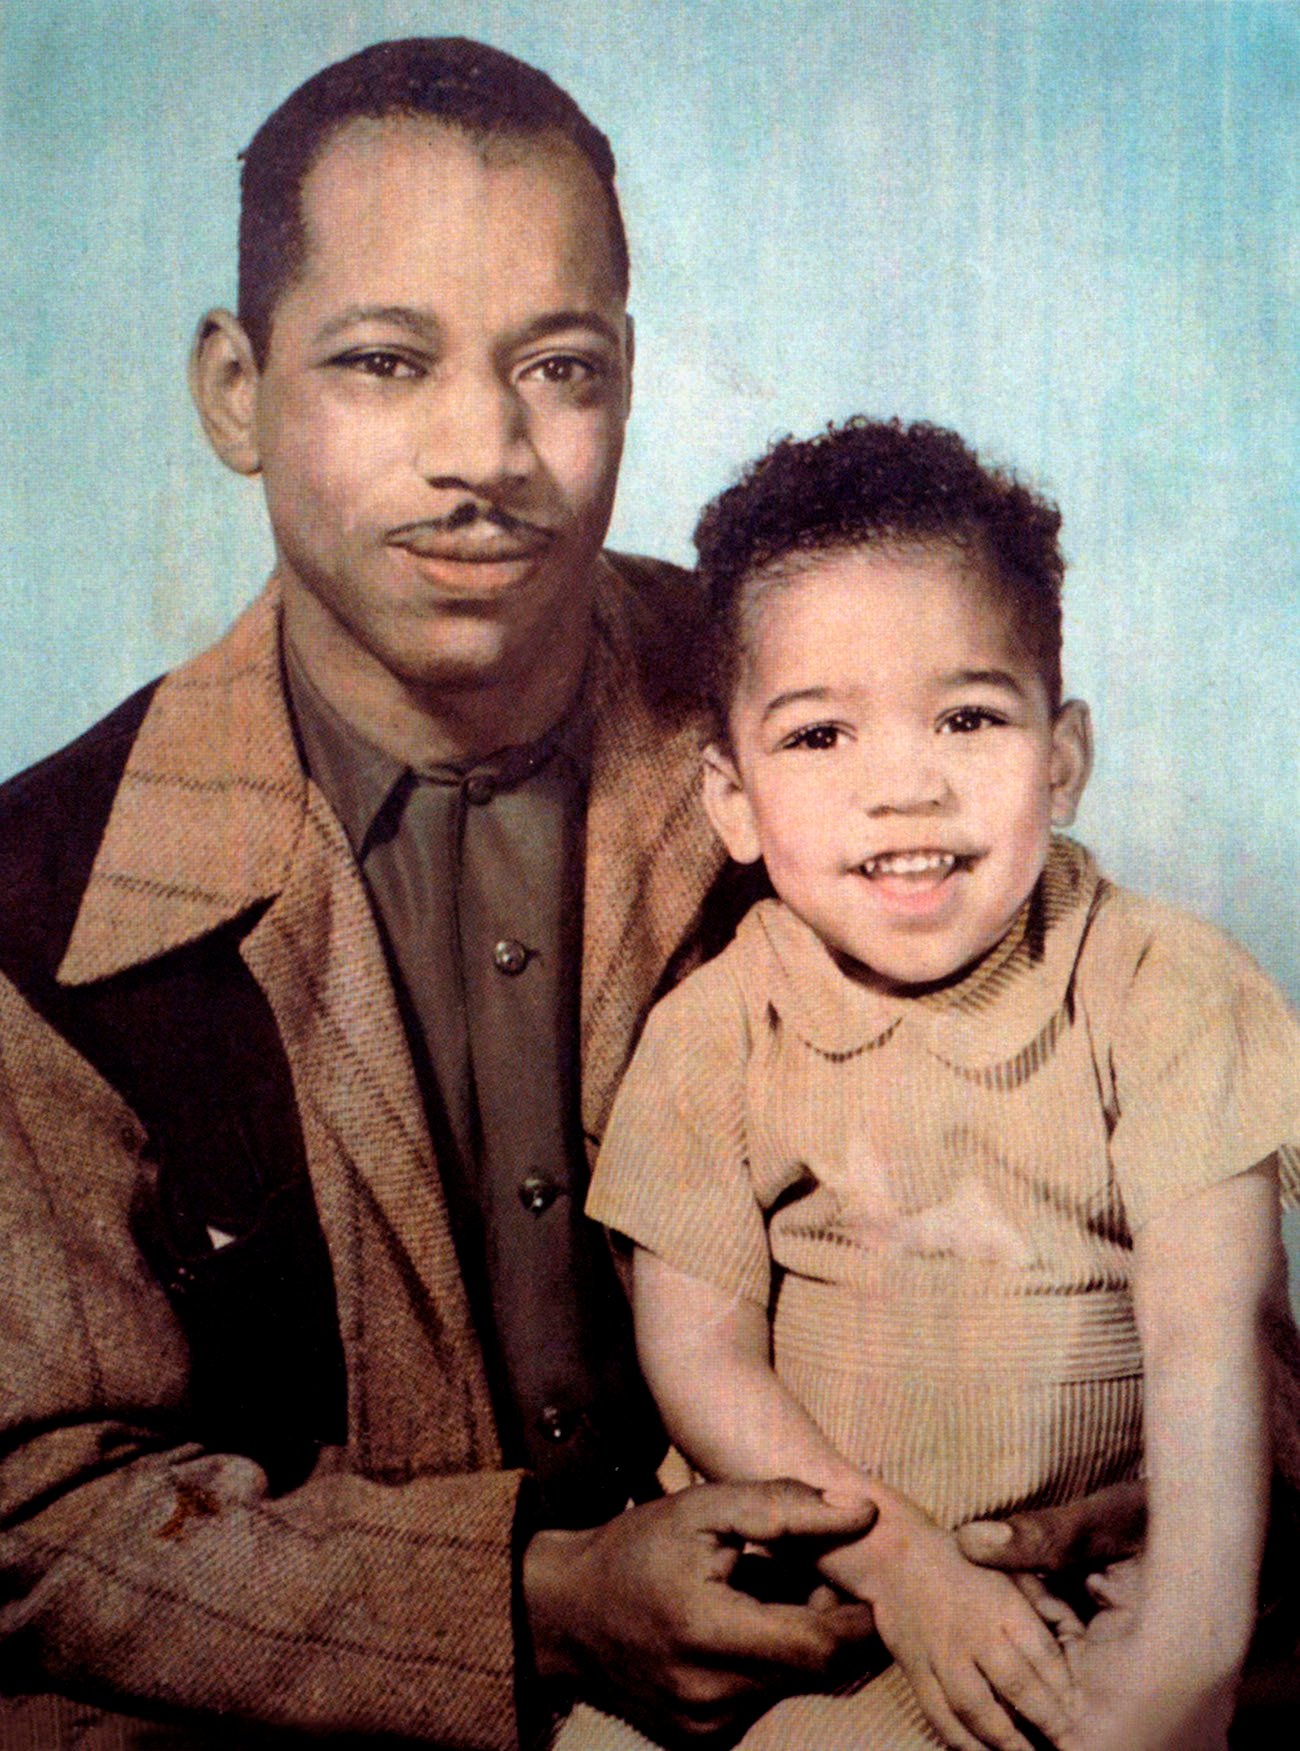 Al and young Jimi Hendrix posing for the camera in 1945.